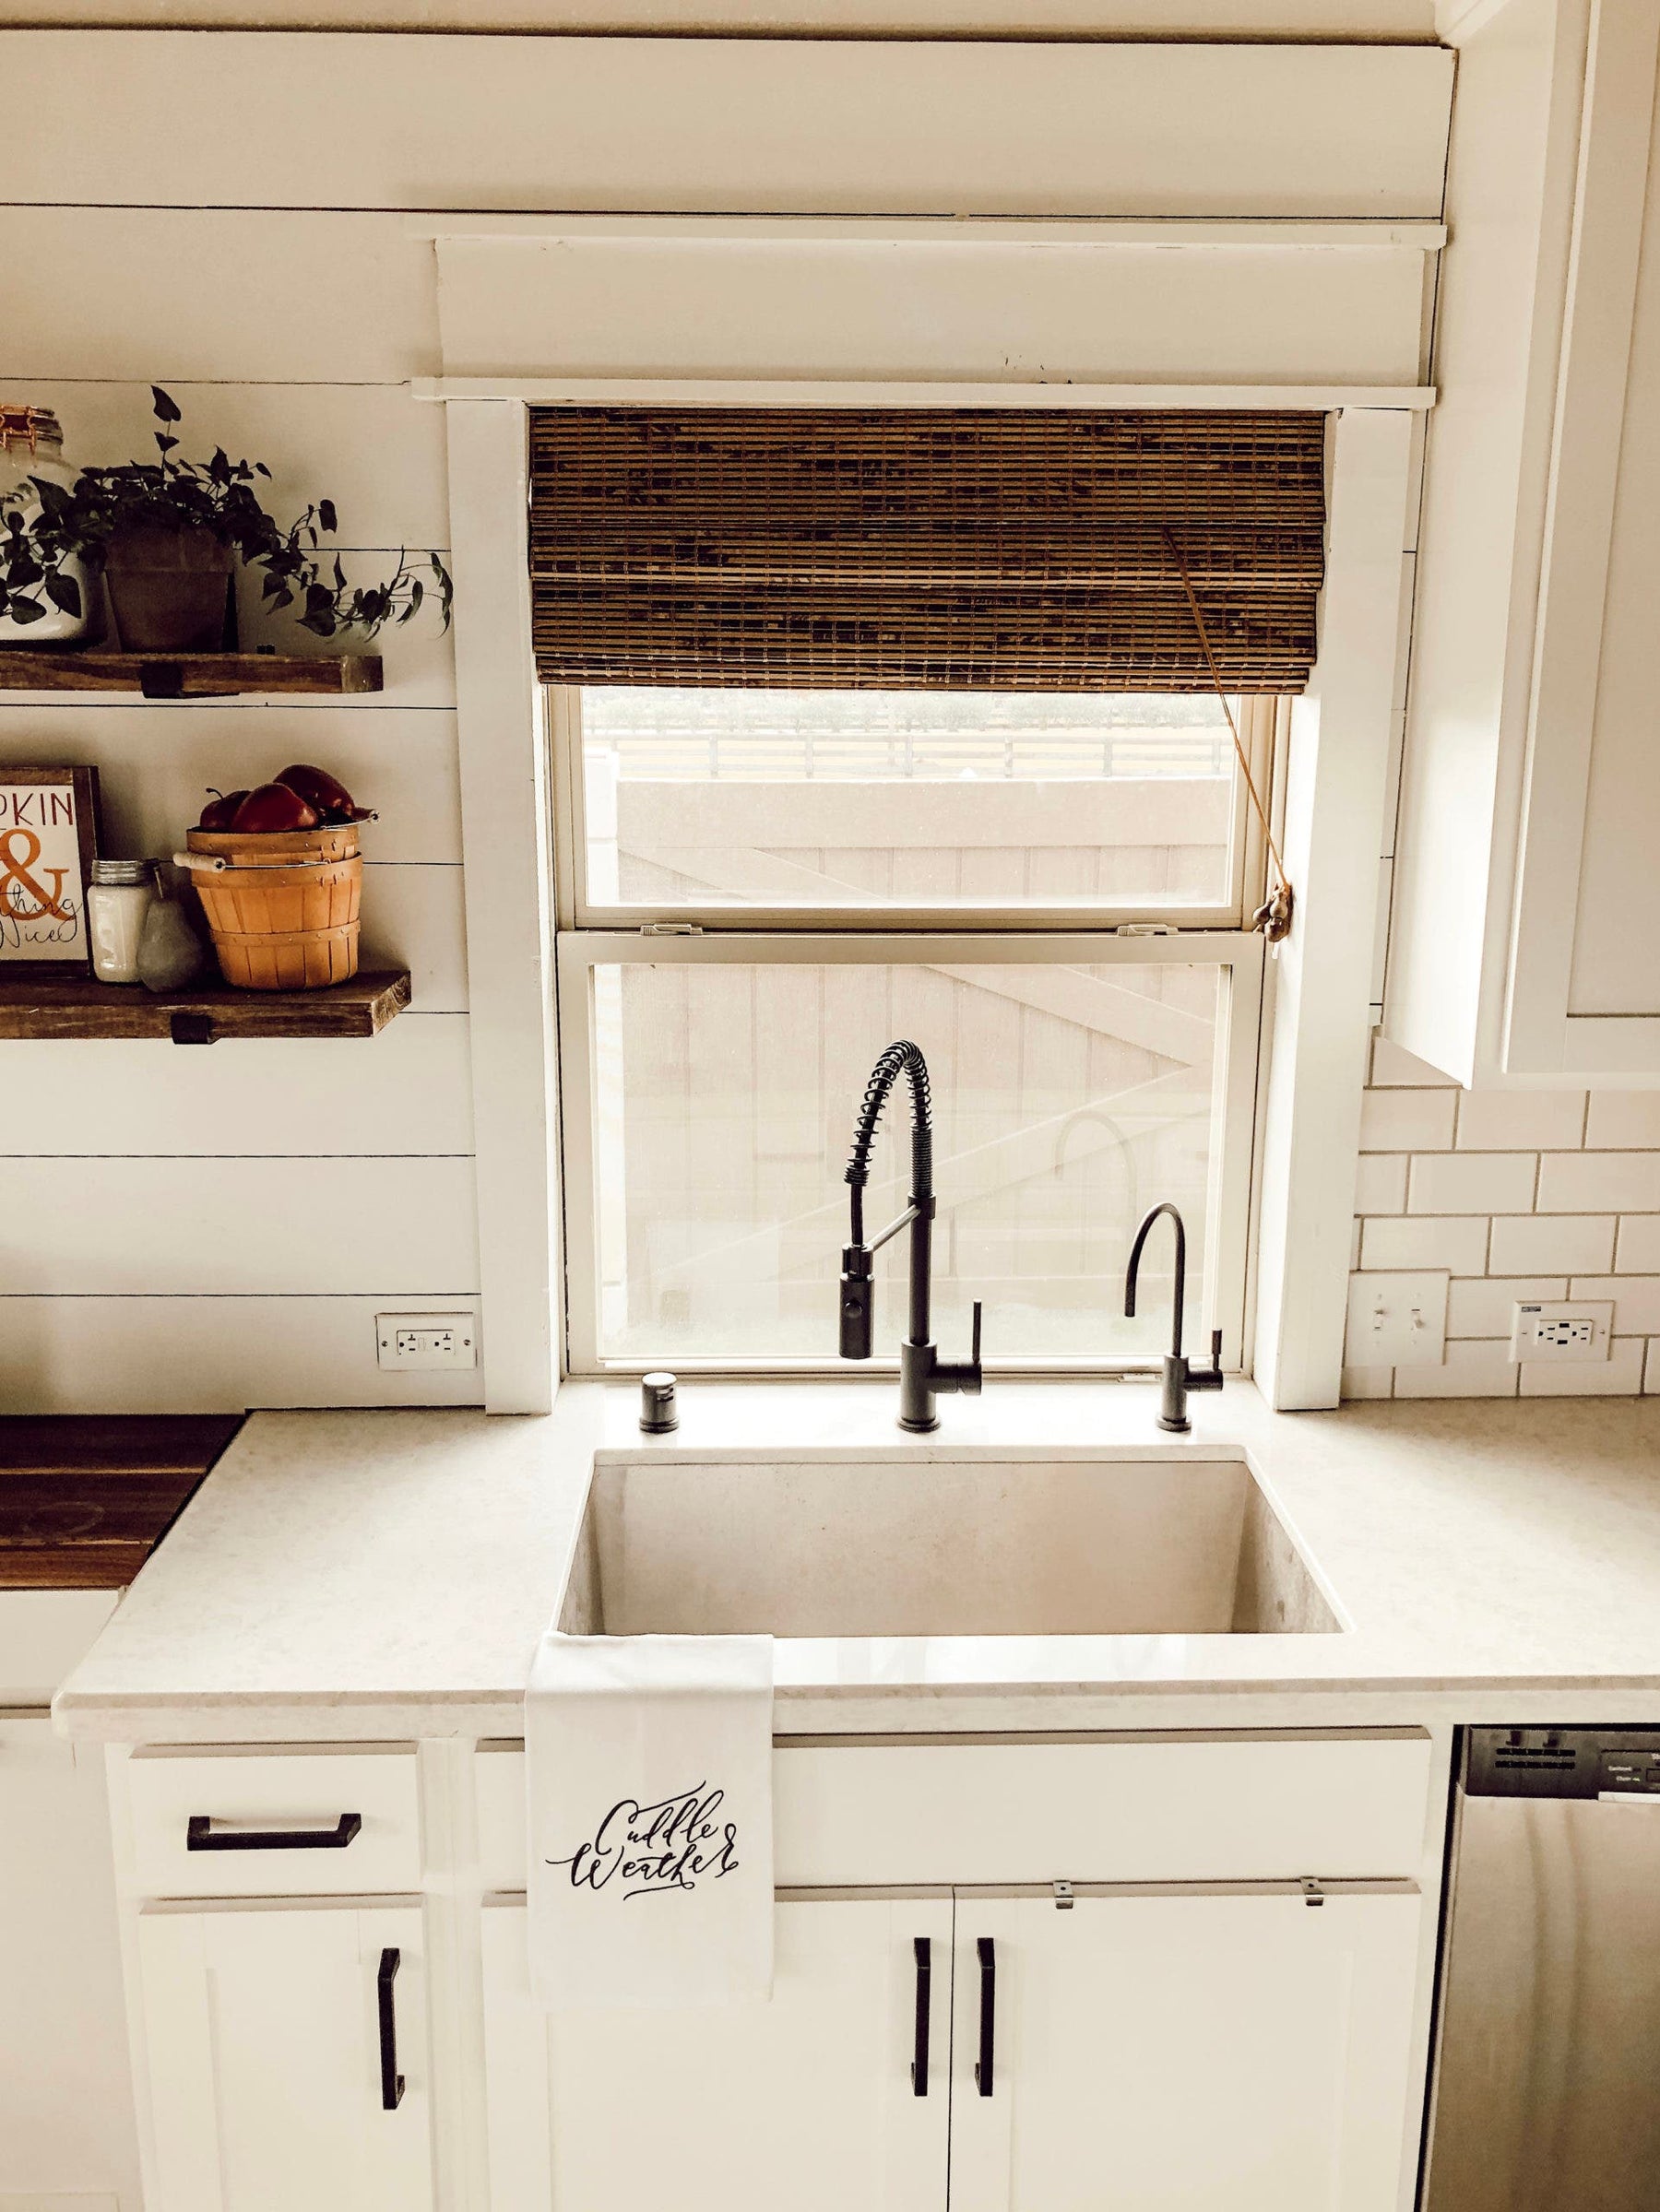 4 Kitchen Upgrades to Make a Small Space More Usable